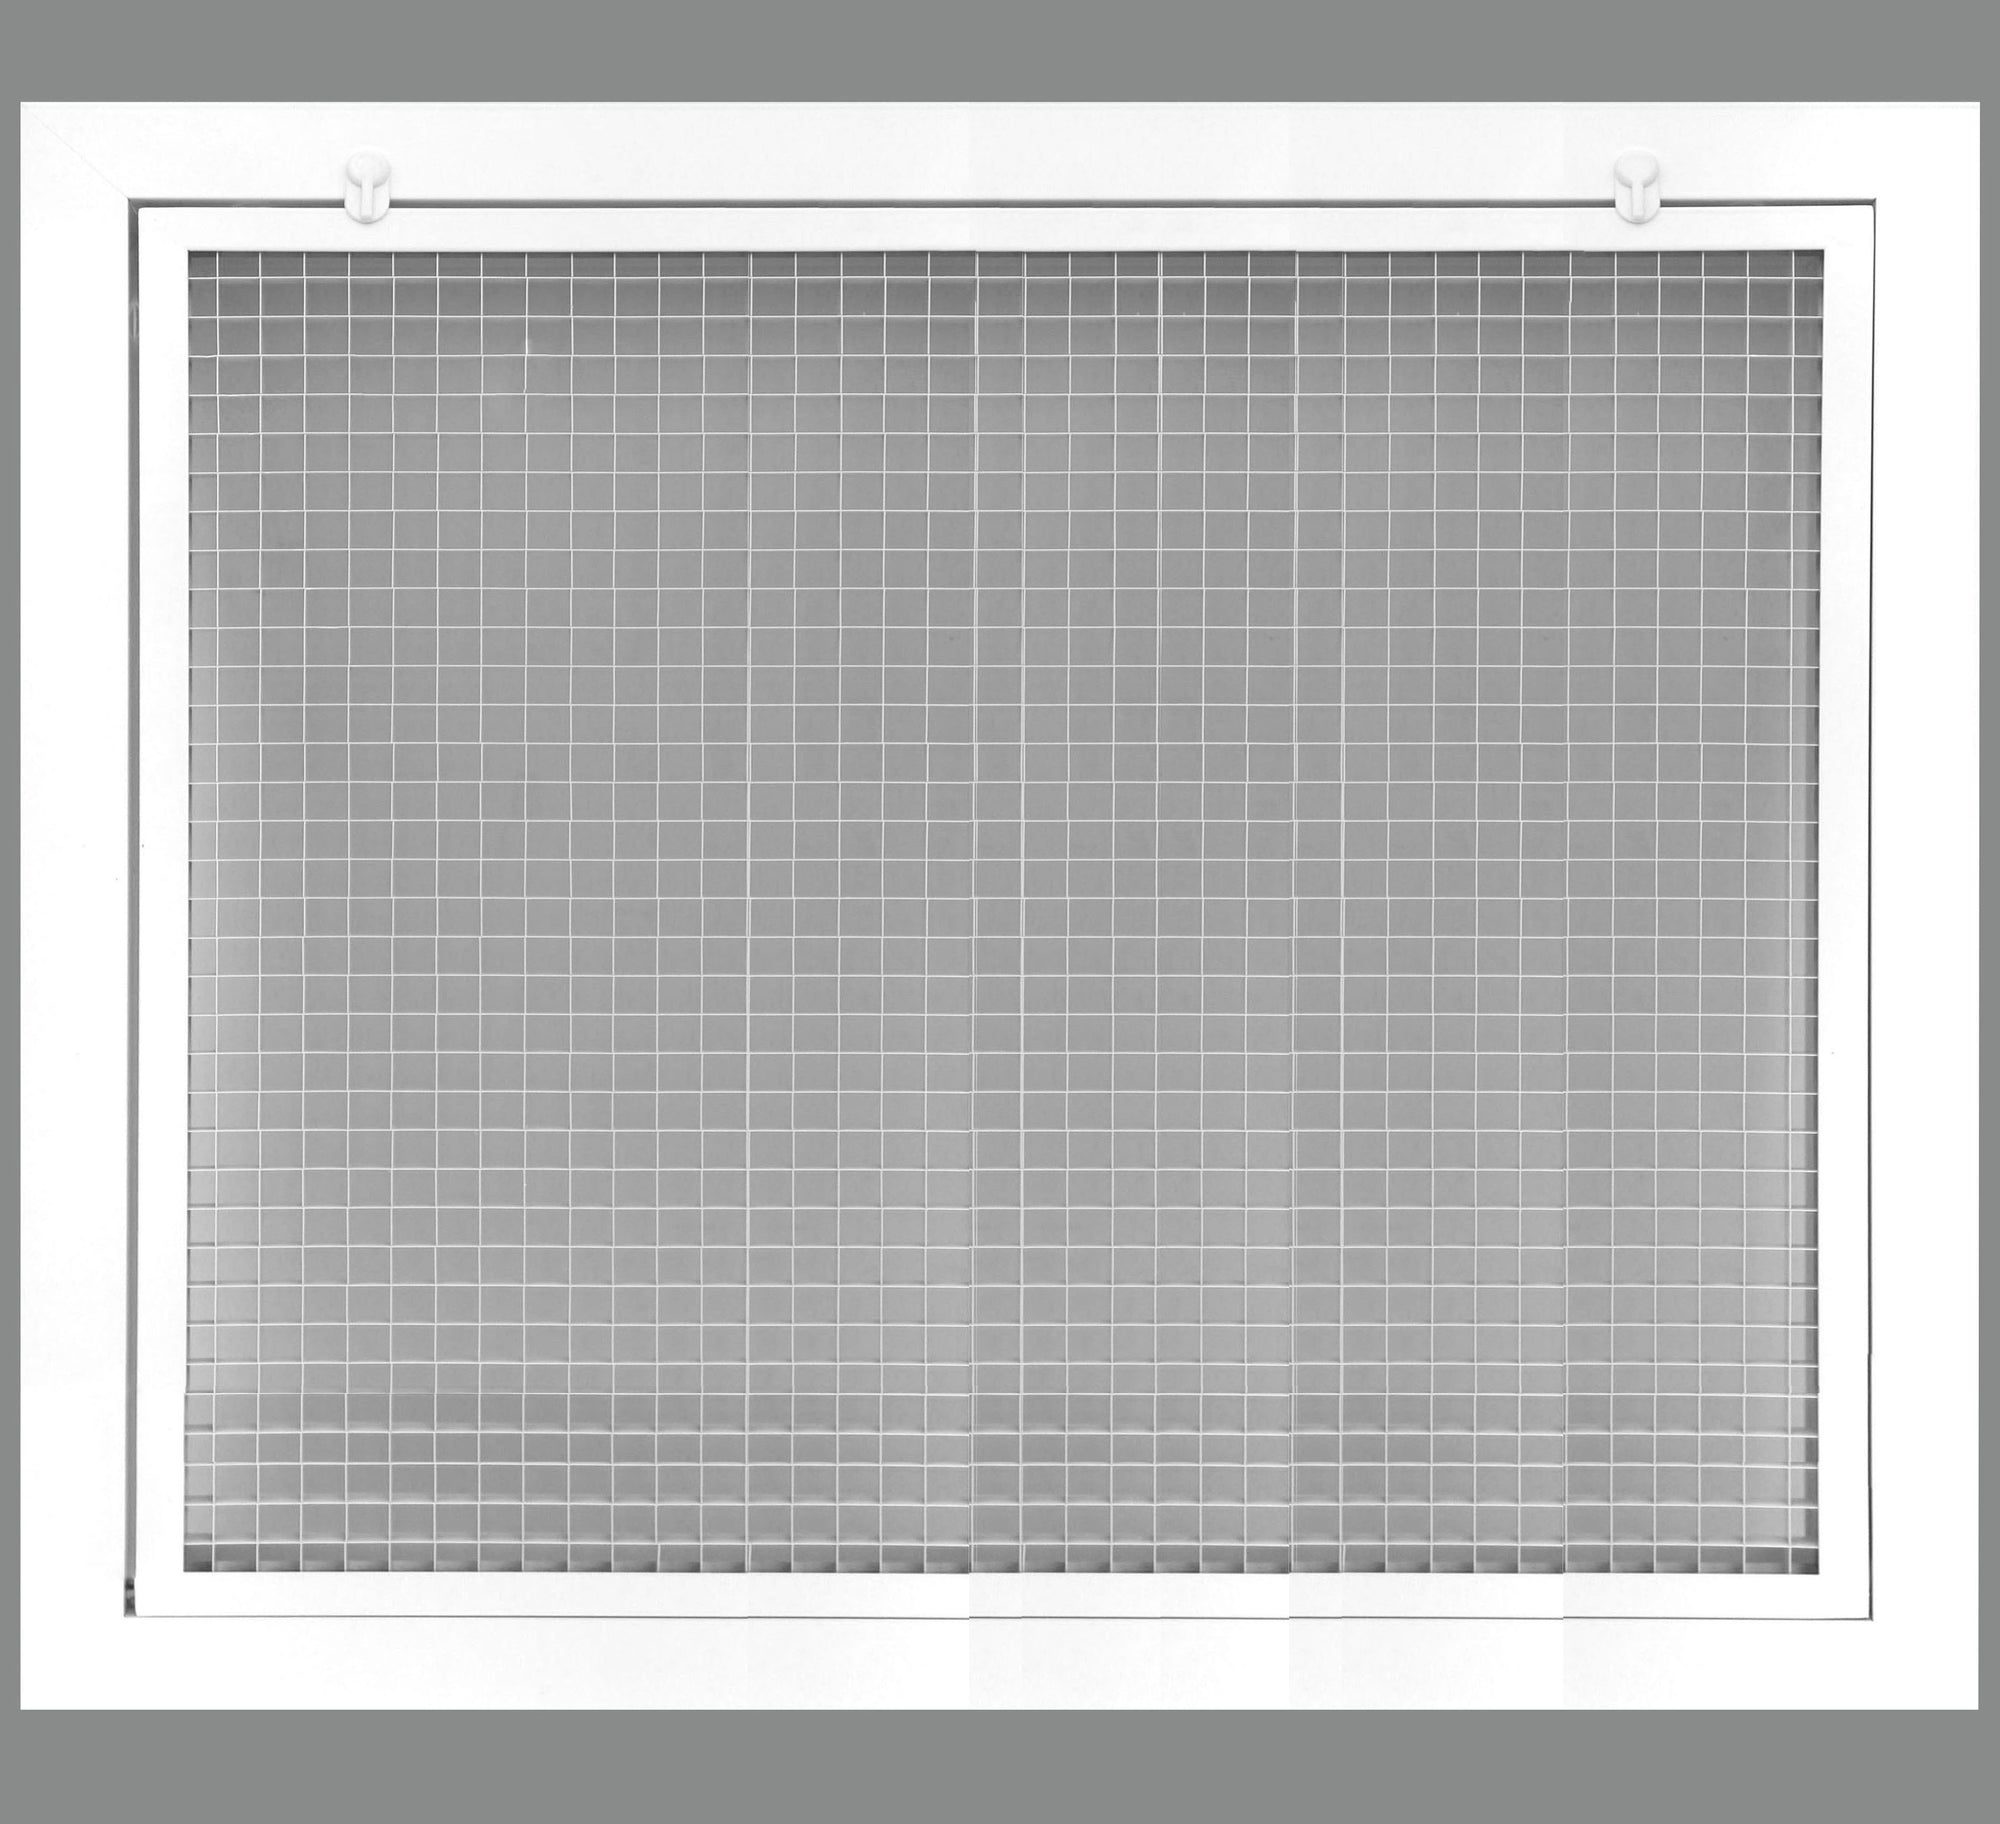 30" x 28" Cube Core Eggcrate Return Air Filter Grille for 1" Filter